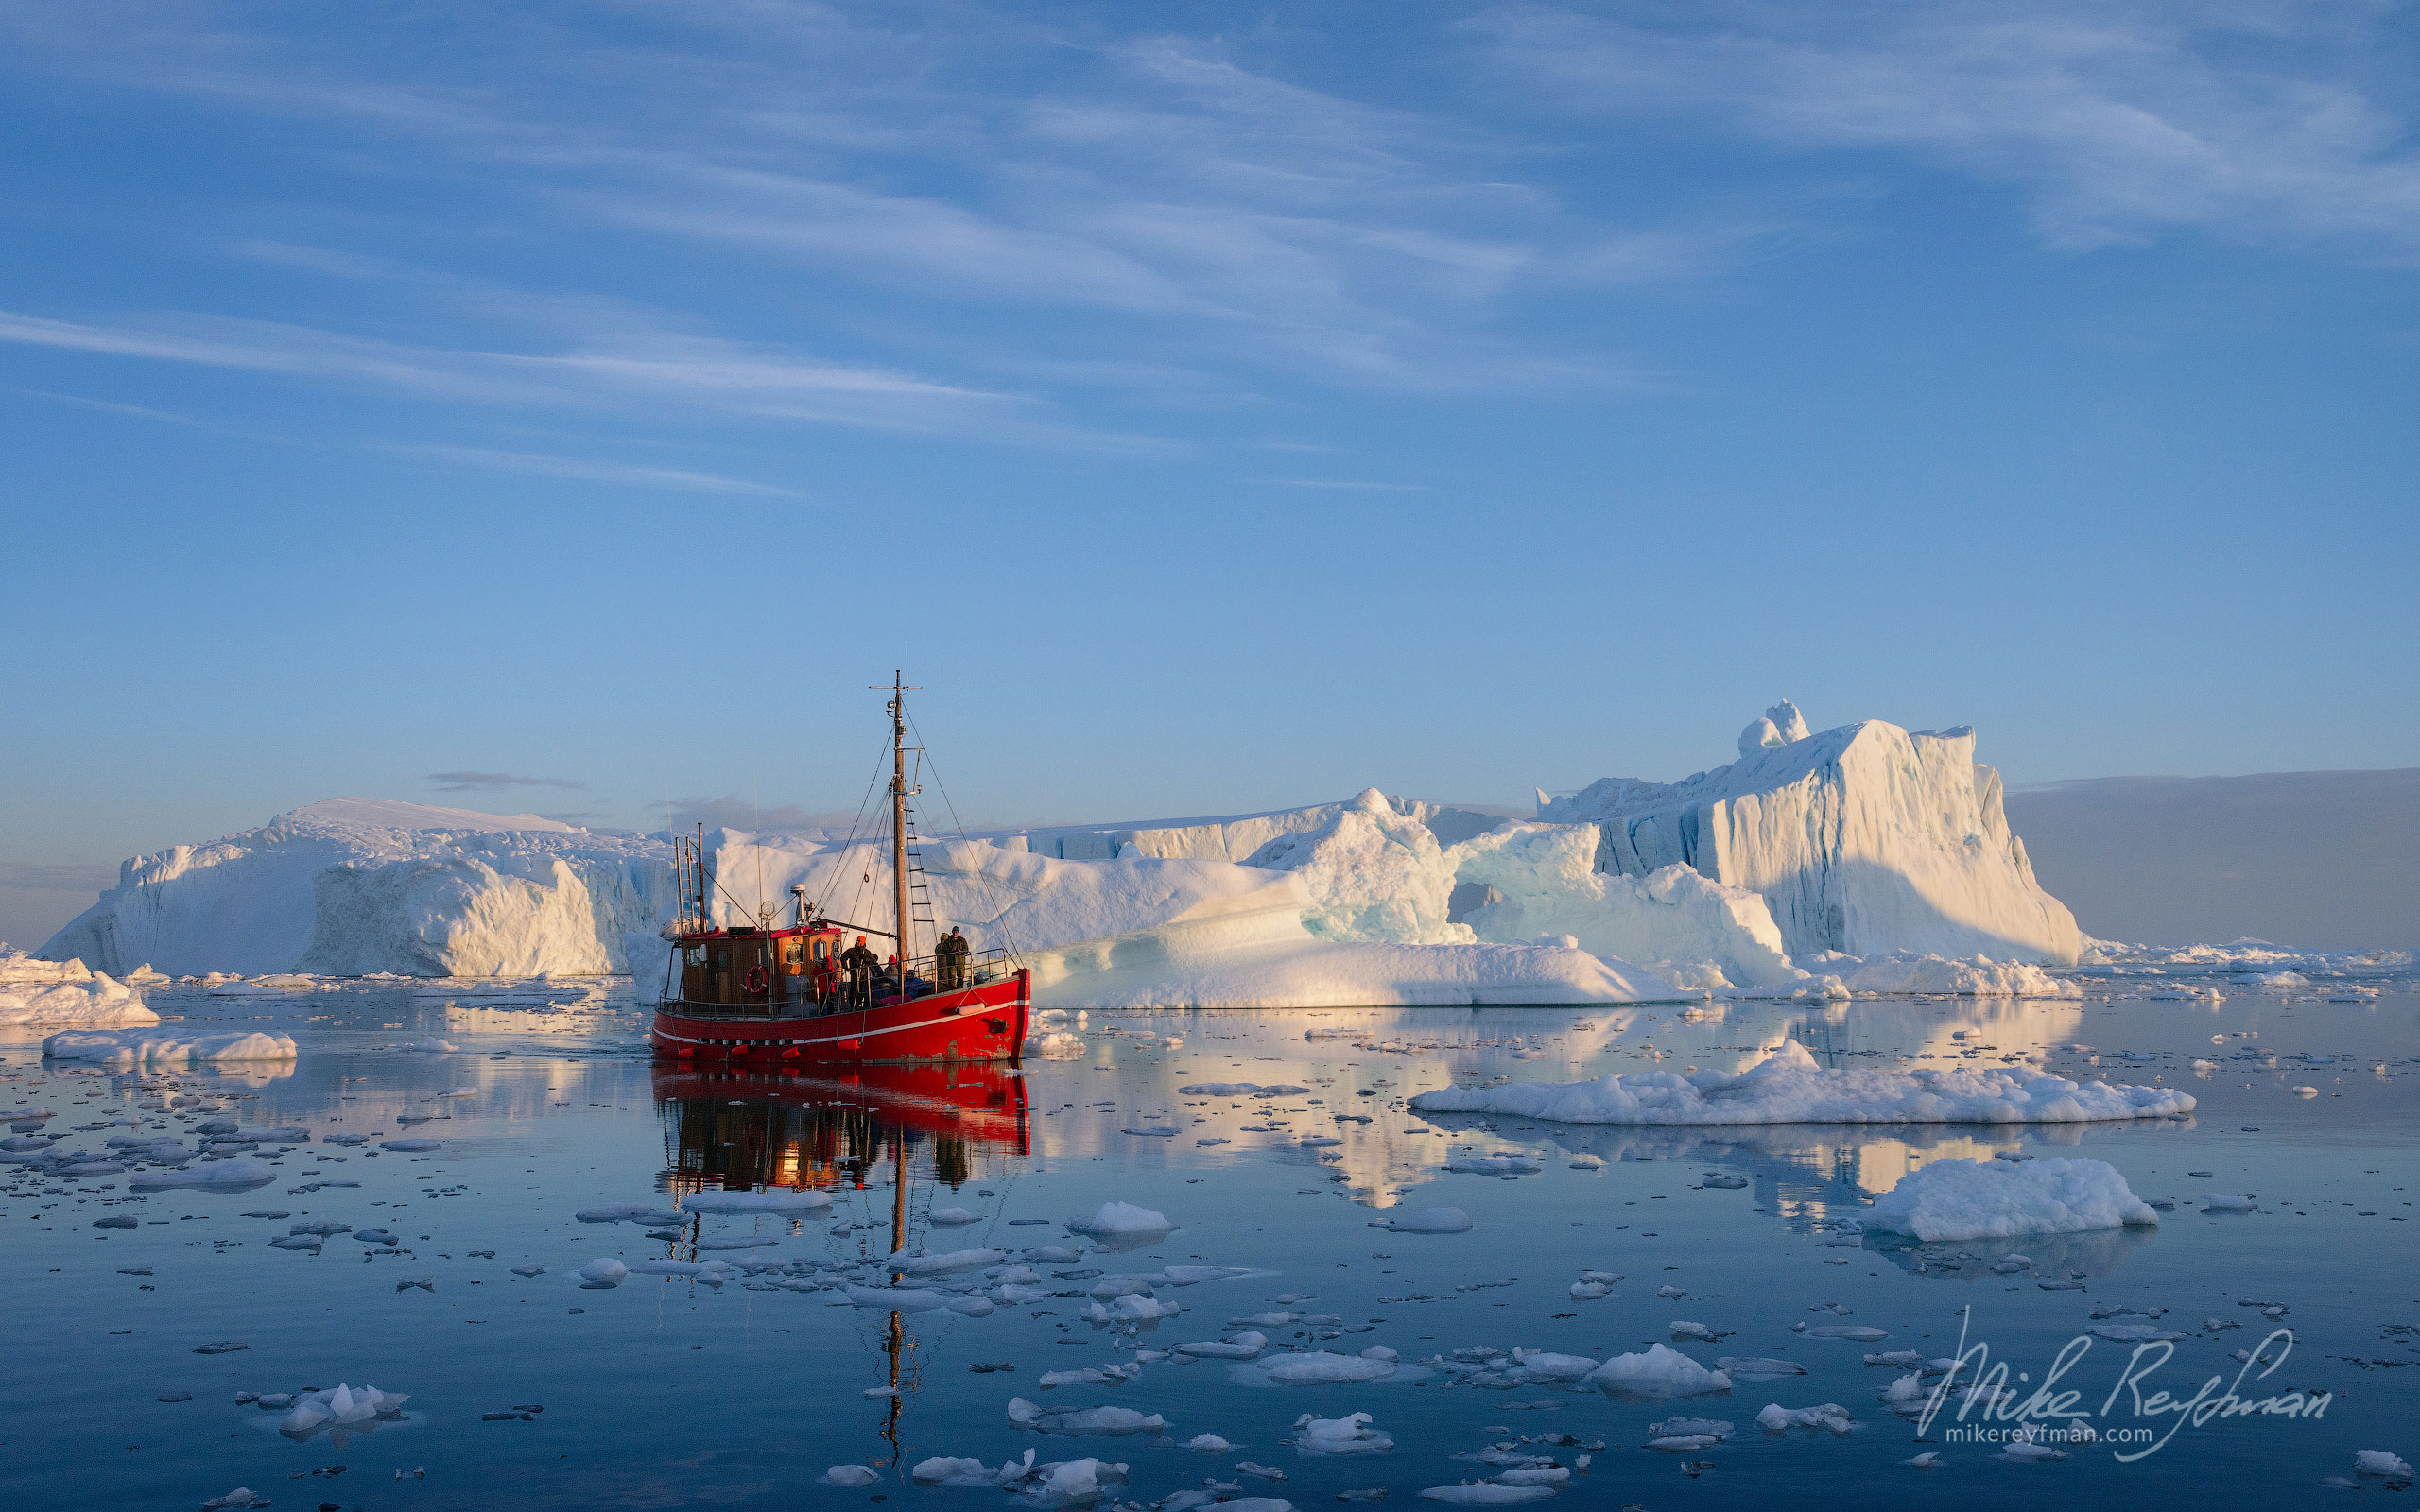 Journeying through Arctic Landscape. Ilulissat Icefjord. Disco Bay, Greenland. 010-GR-IL_D8B5024 - Enormous icebergs of Ilulissat Icefjord and Disco Bay. Western Greenland. - Mike Reyfman Photography